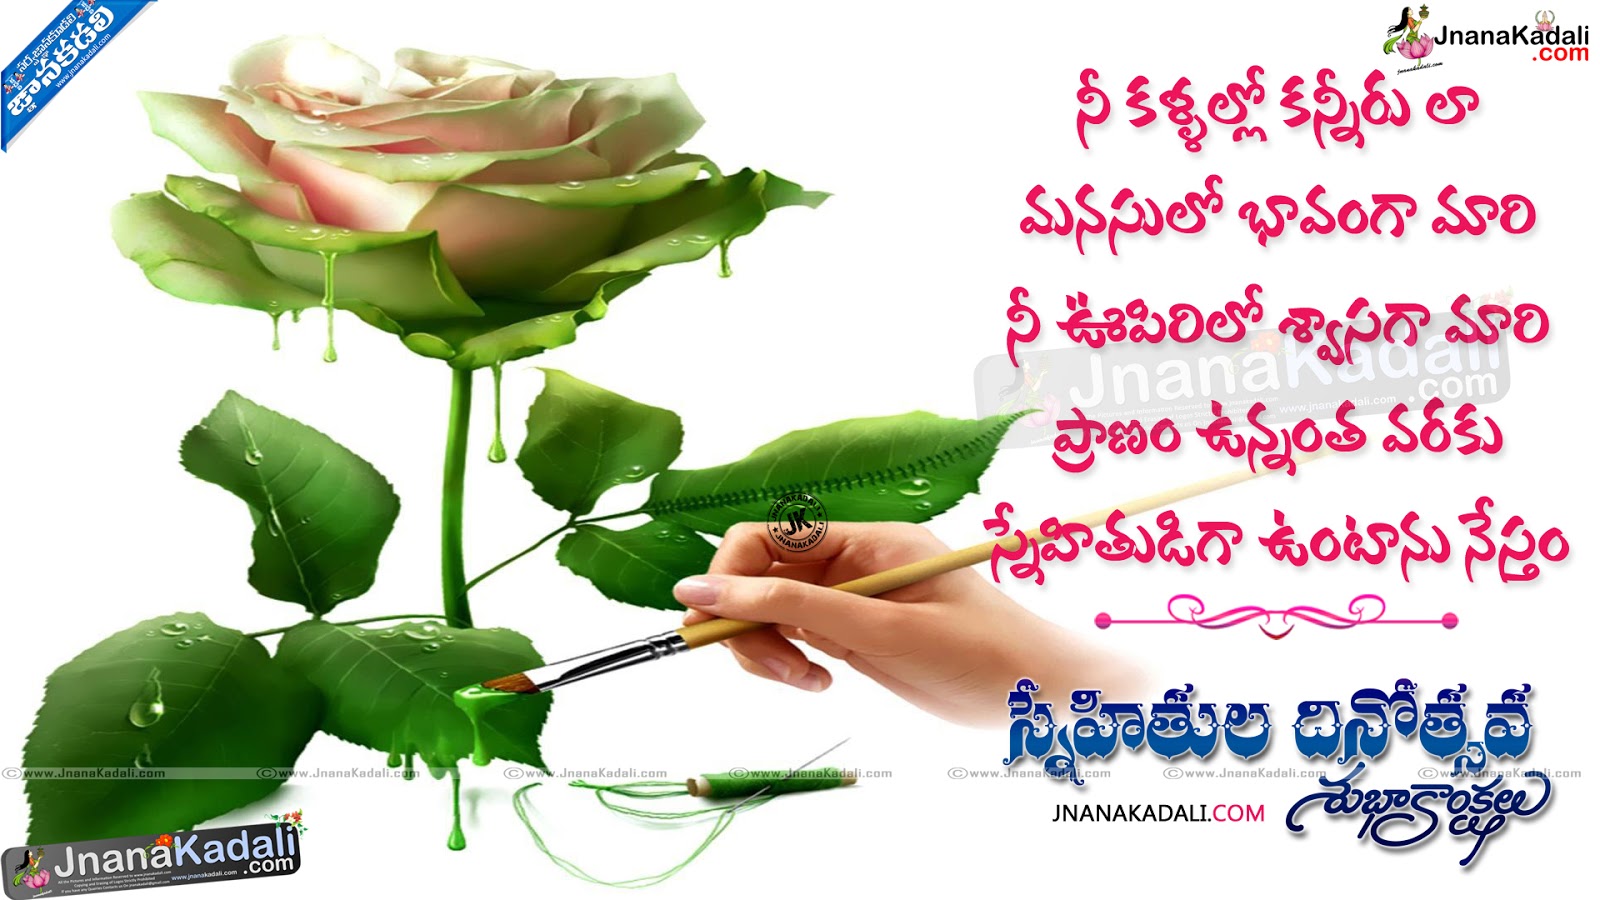 Friendship Day Quotes Backgrounds Wallpapers with Beautiful Telugu ...